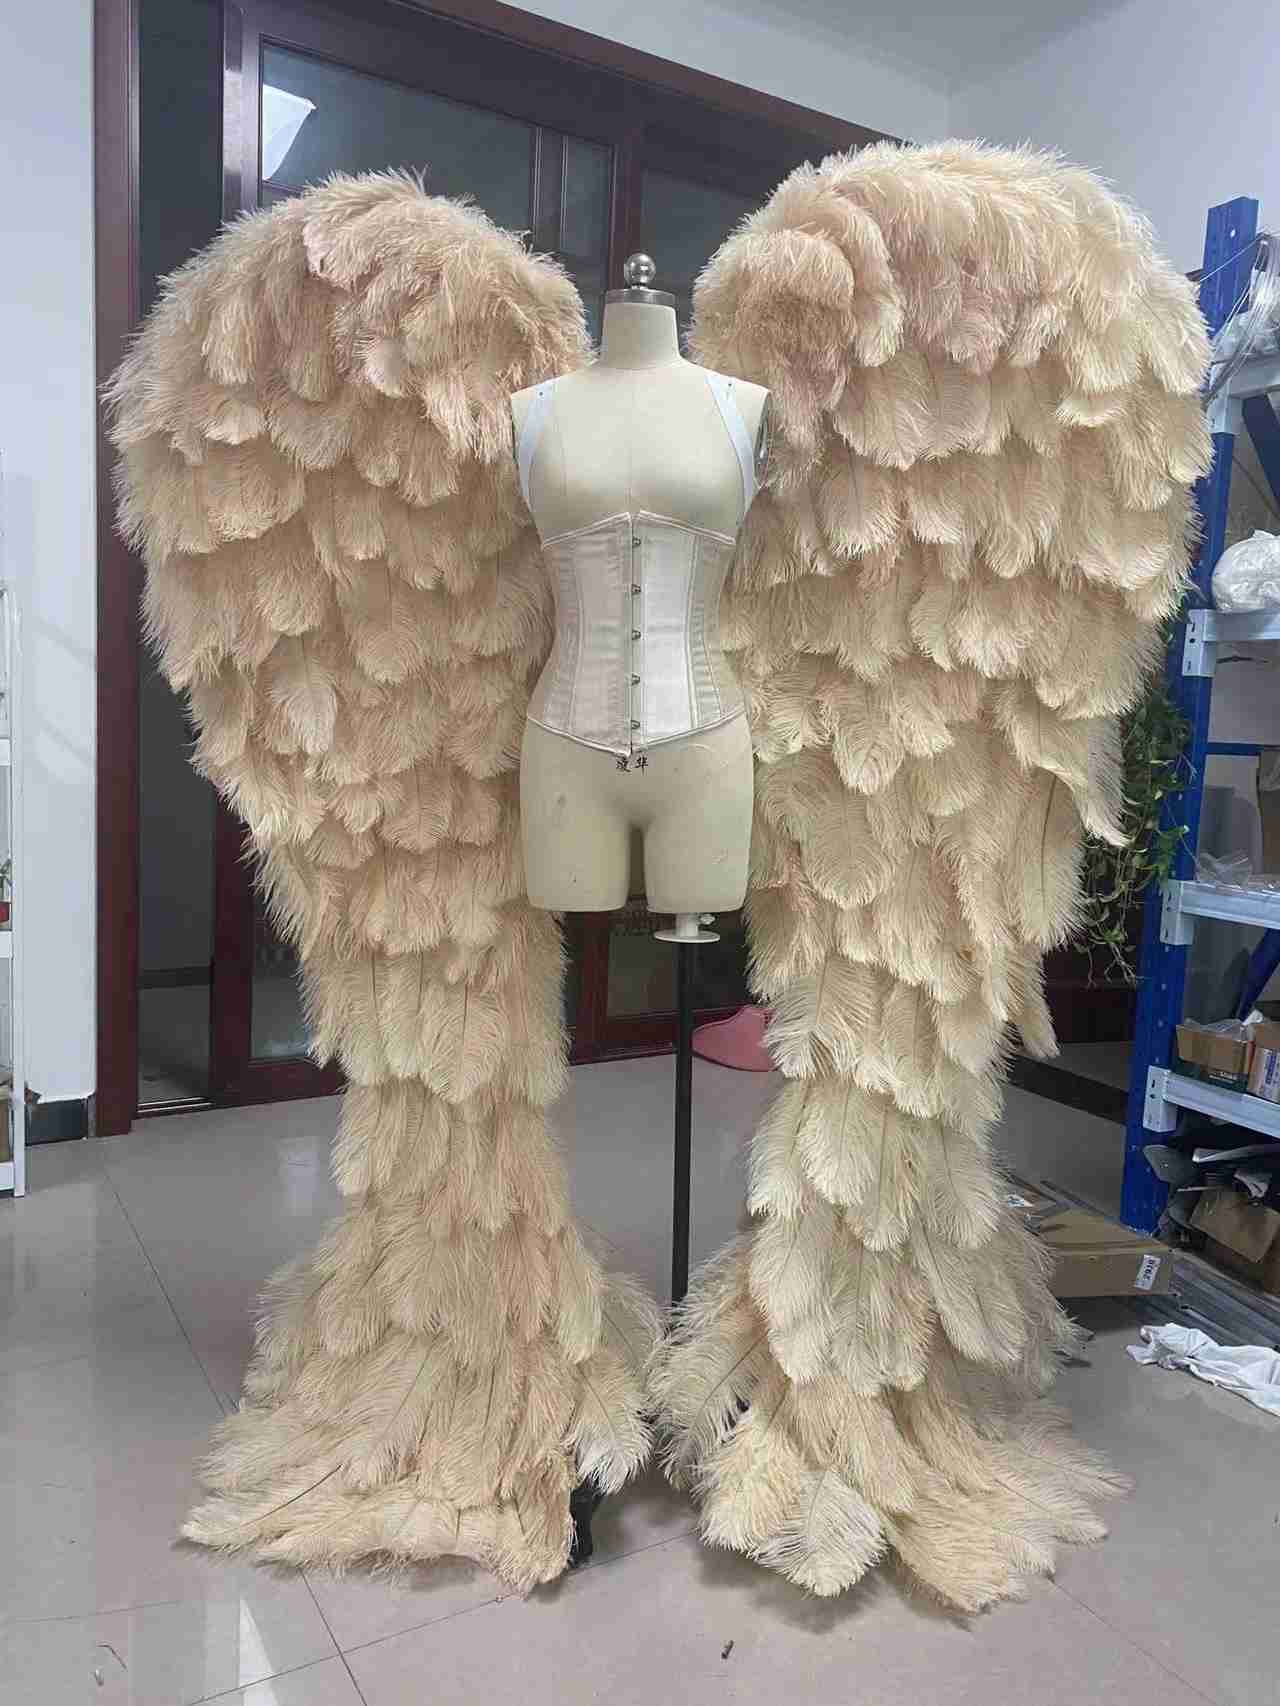 Our luxury beige angel wings from the front. Made from ostrich feathers. Wings for angel costume. Suitable for photoshoots especially for boudoirs.